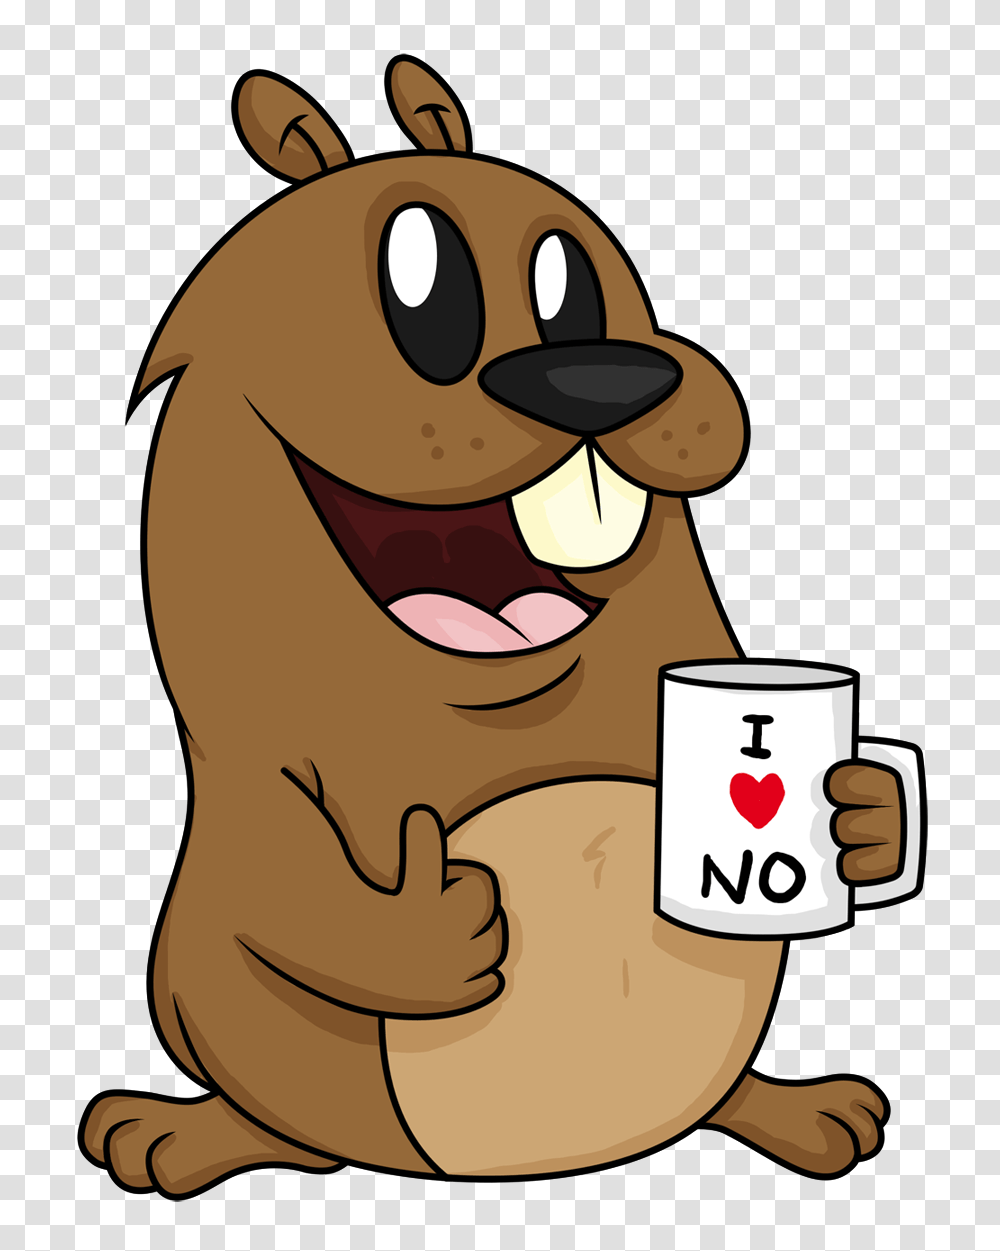 Fear Of The No Go For No, Coffee Cup, Face, Sunglasses, Accessories Transparent Png